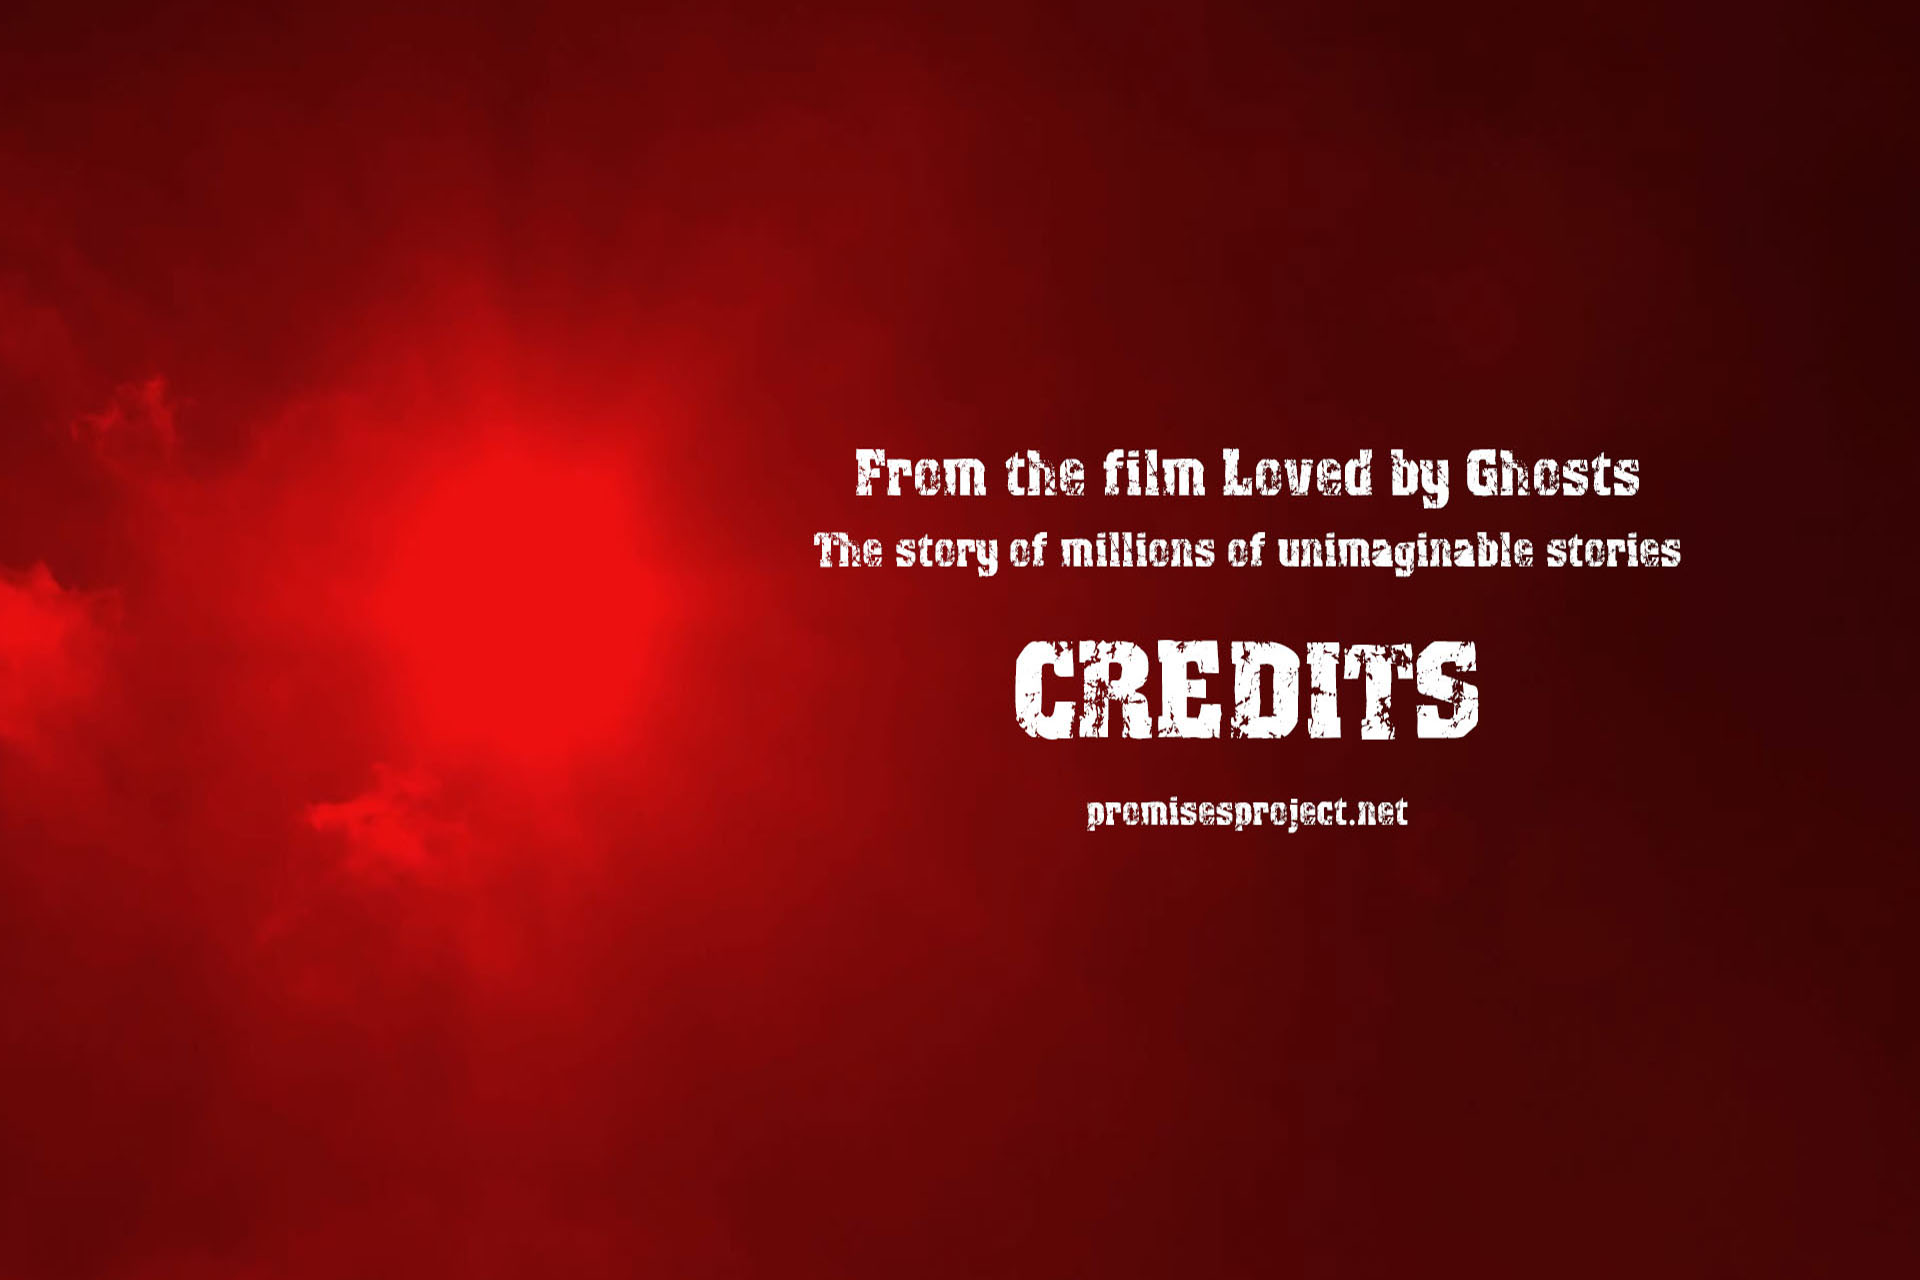 Credits for the film 'Loved by Ghosts'